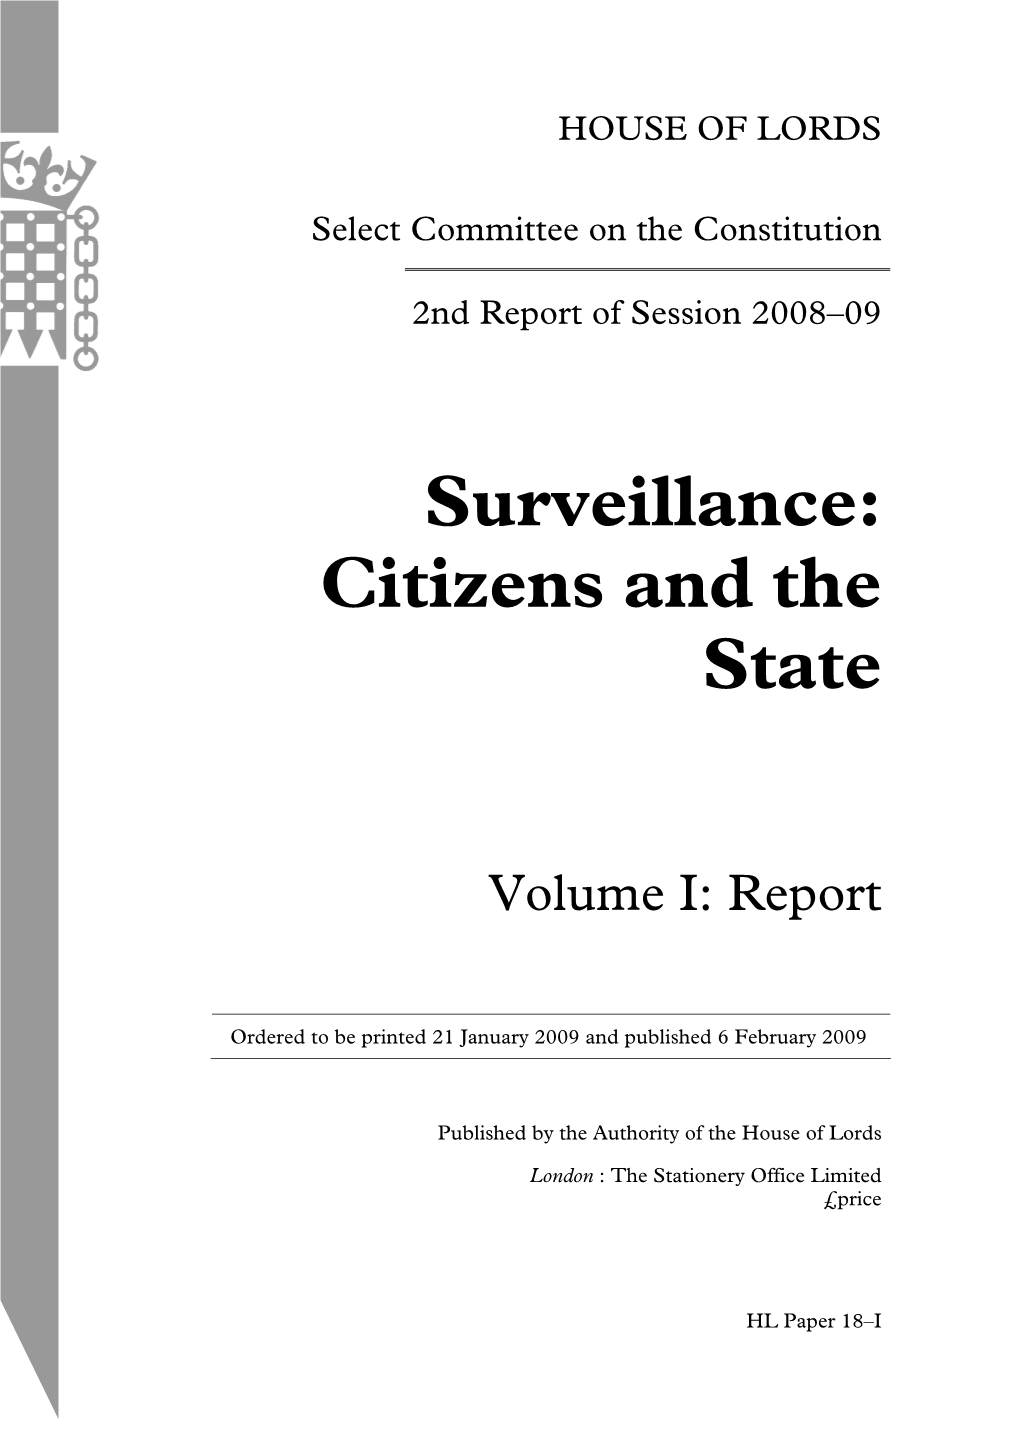 Surveillance: Citizens and the State